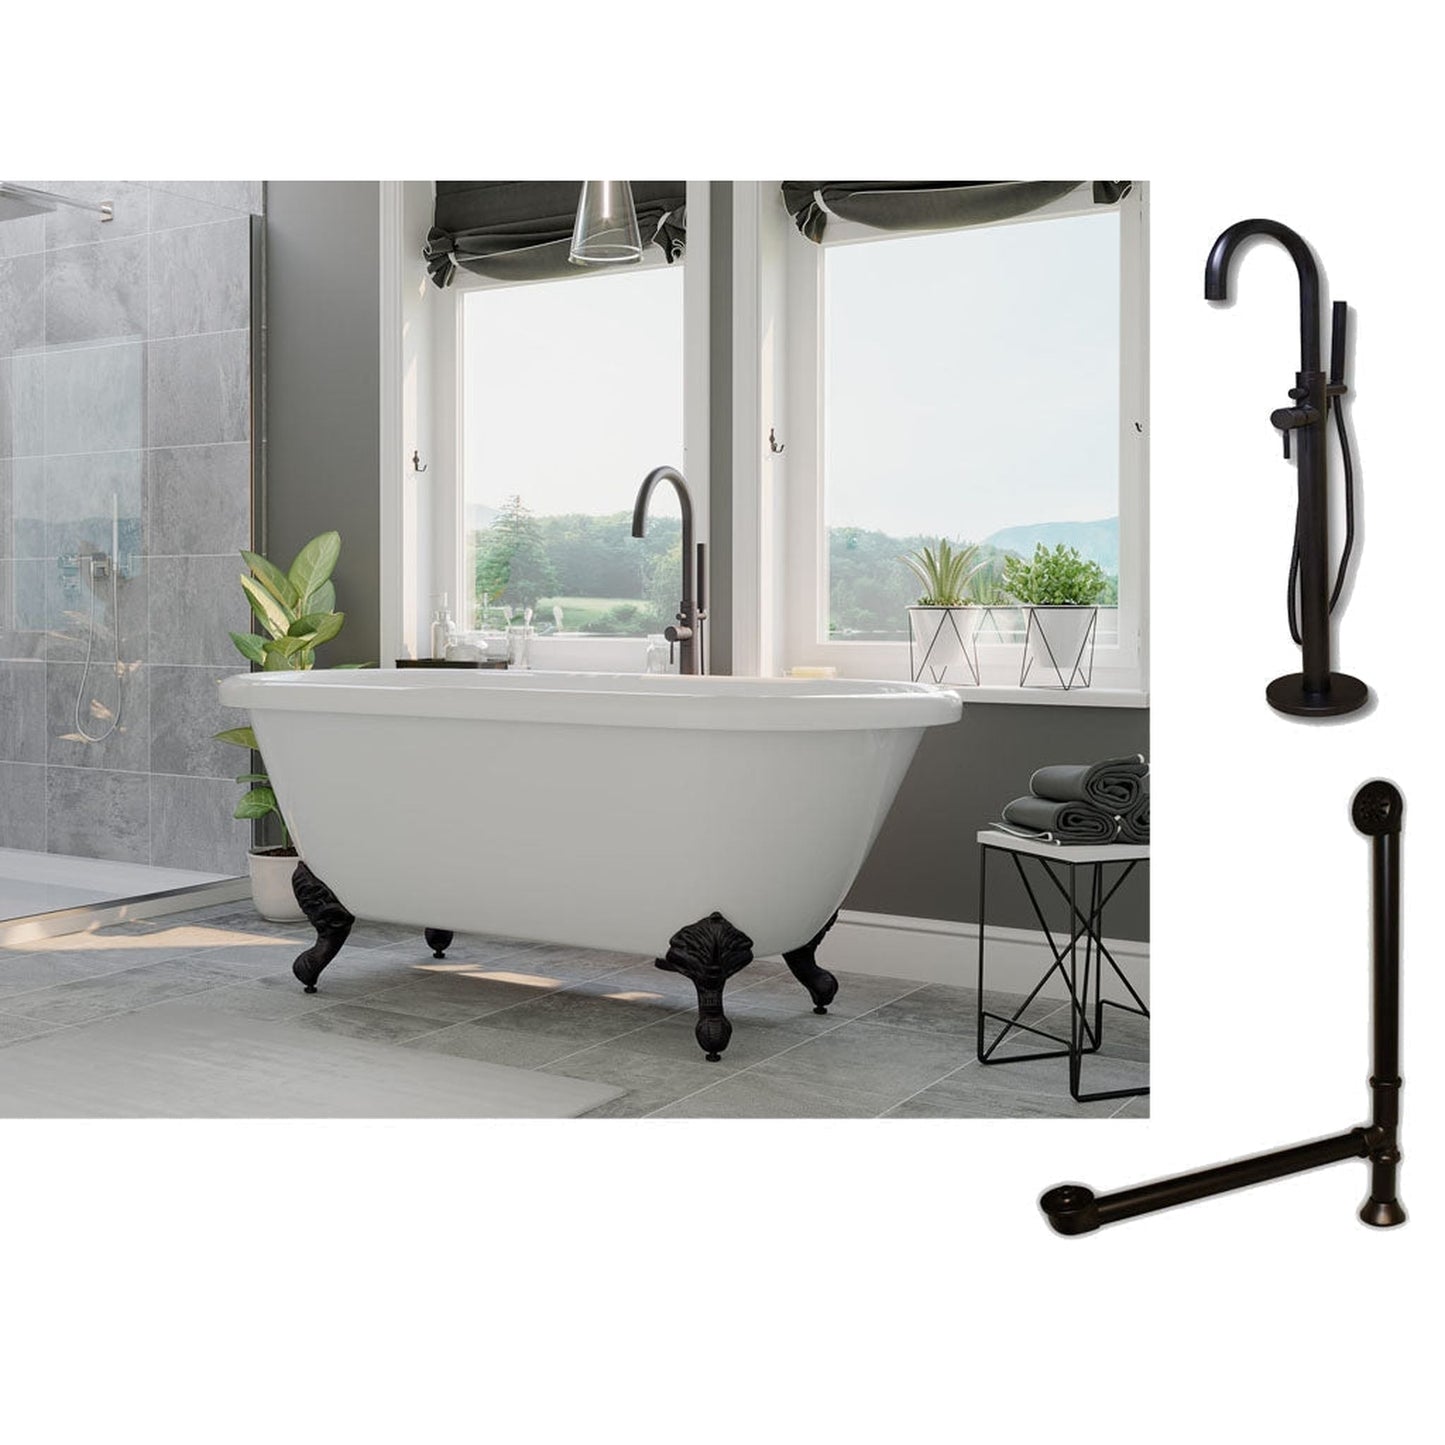 Cambridge Plumbing 70" White Acrylic Double Ended Clawfoot Bathtub With No Deck Holes And Complete Plumbing Package Including Modern Floor Mounted Faucet, Drain And Overflow Assembly In Oil Rubbed Bronze